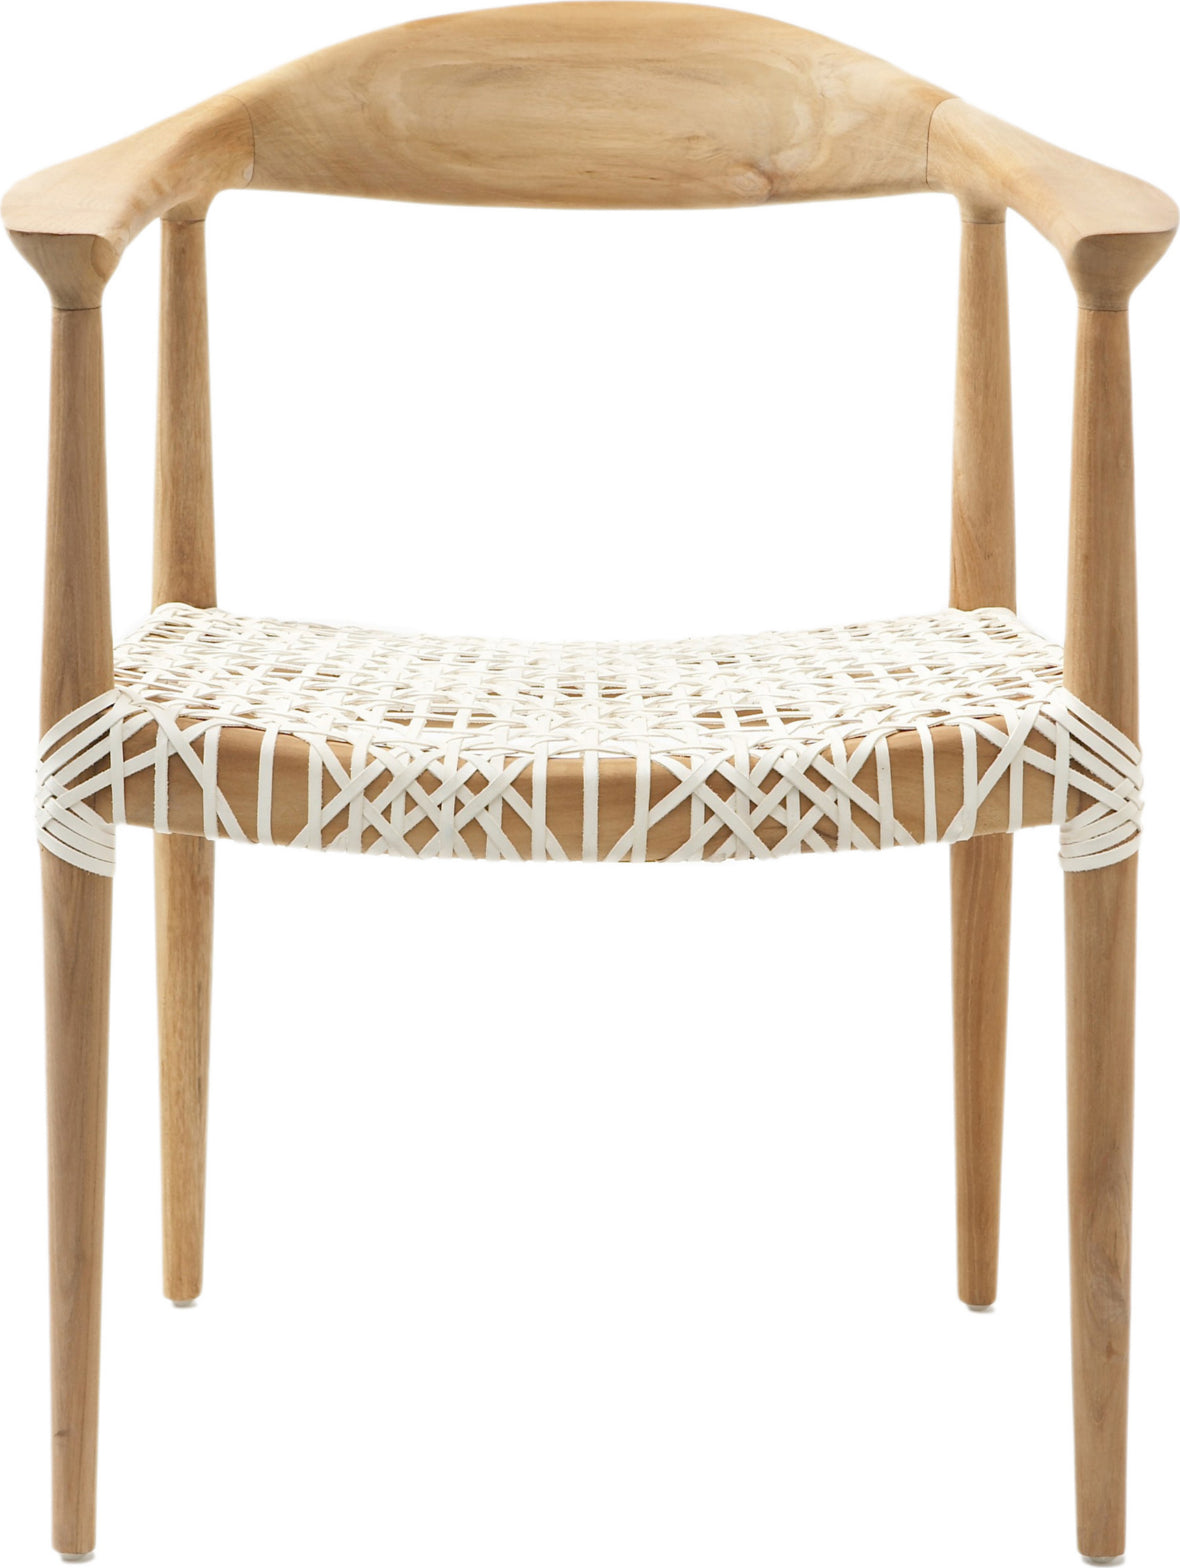 Safavieh Bandelier Arm Chair Light Oak and Off White Furniture main image